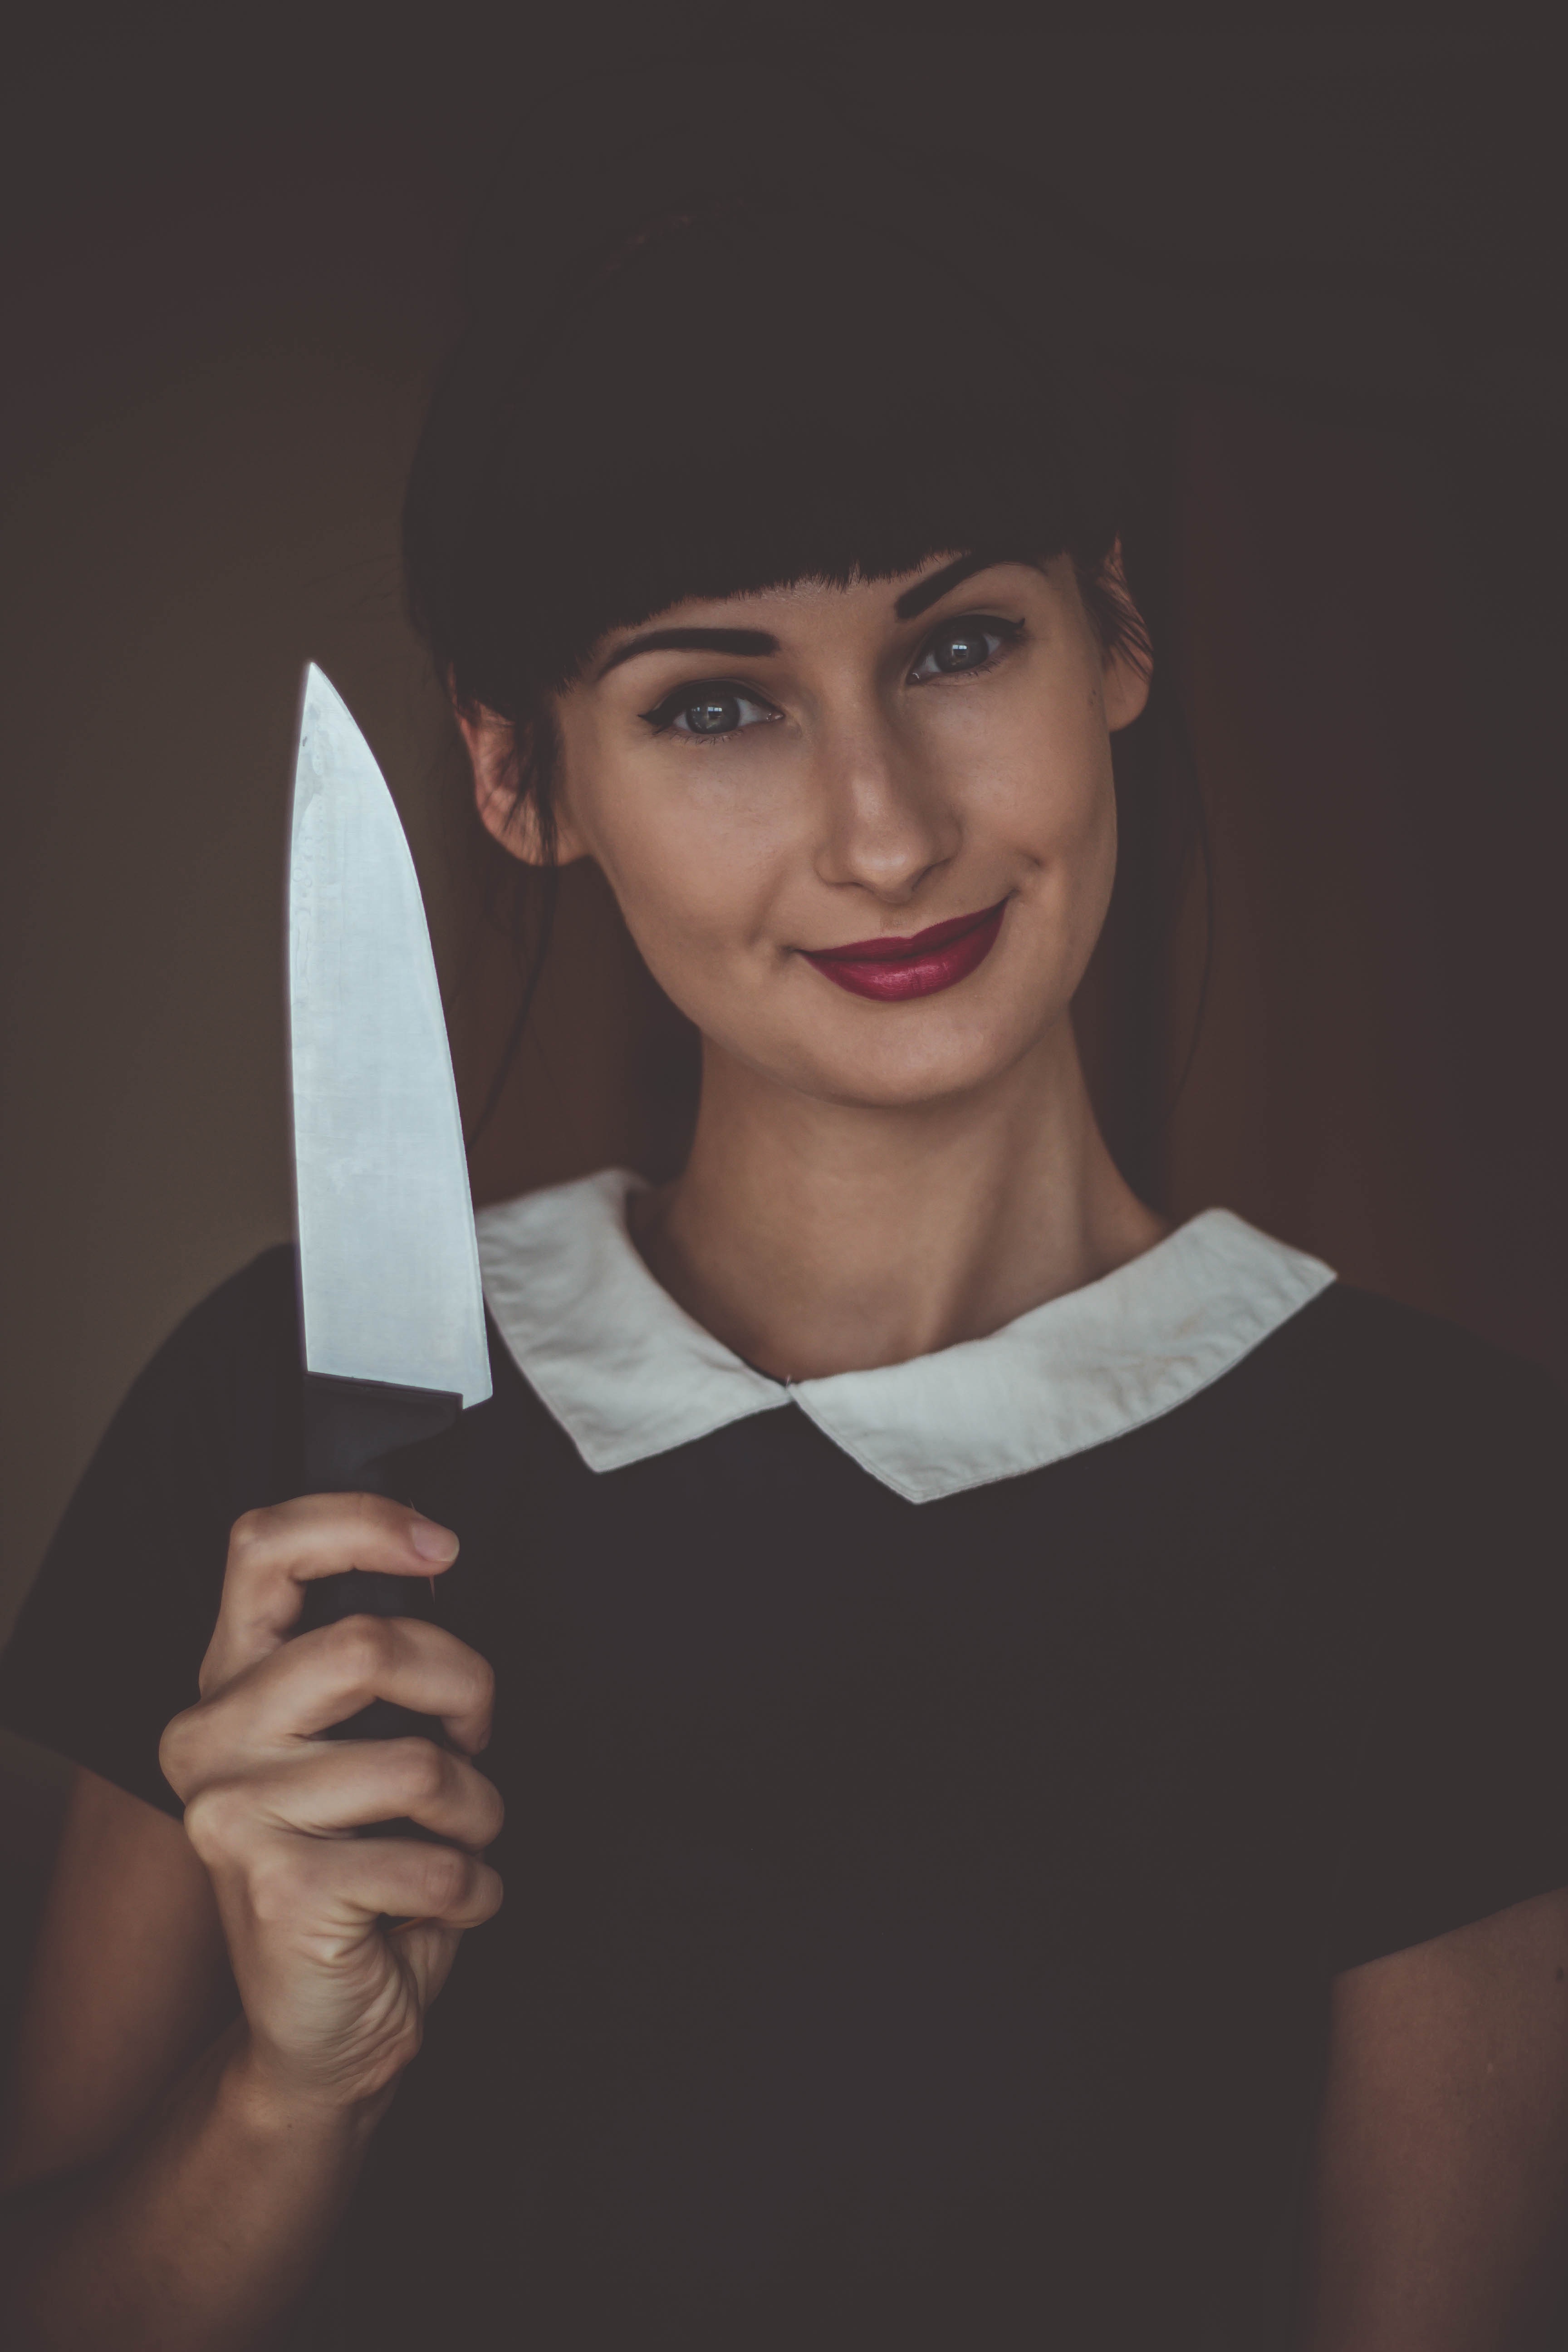 black haired woman smiling while holding a knife